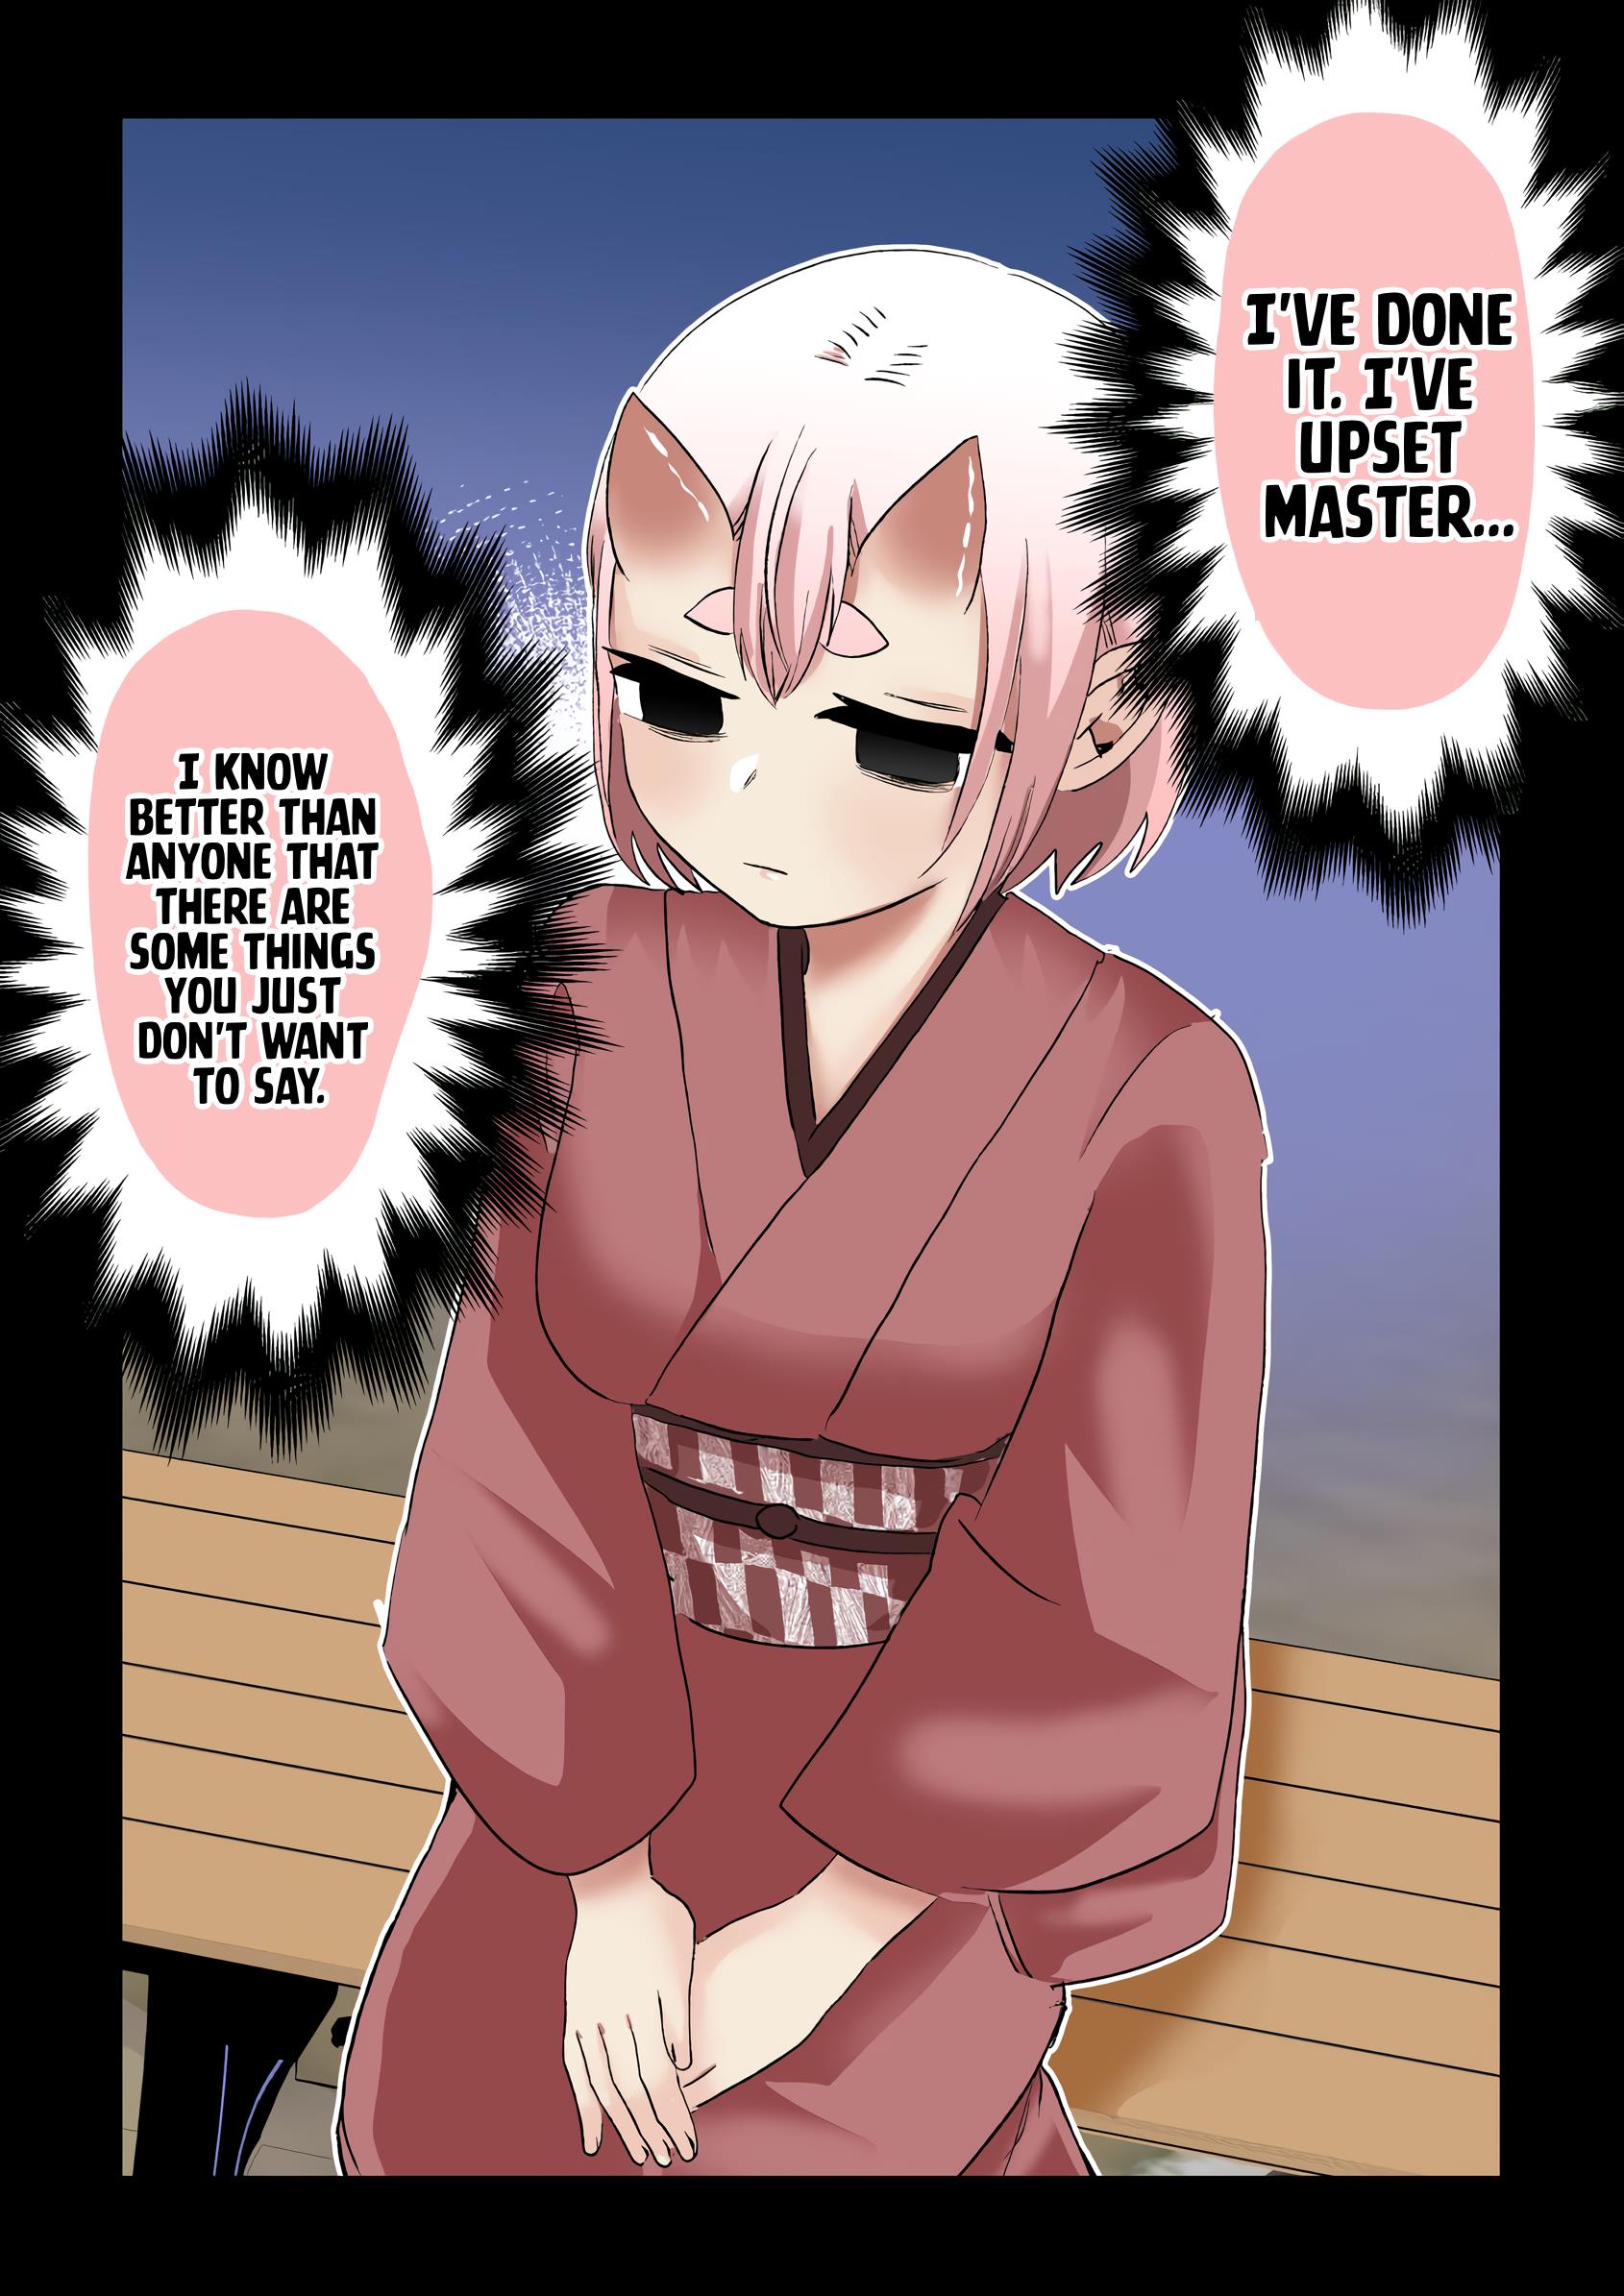 The Oni Bride Who Married Into Our Family. - Page 1